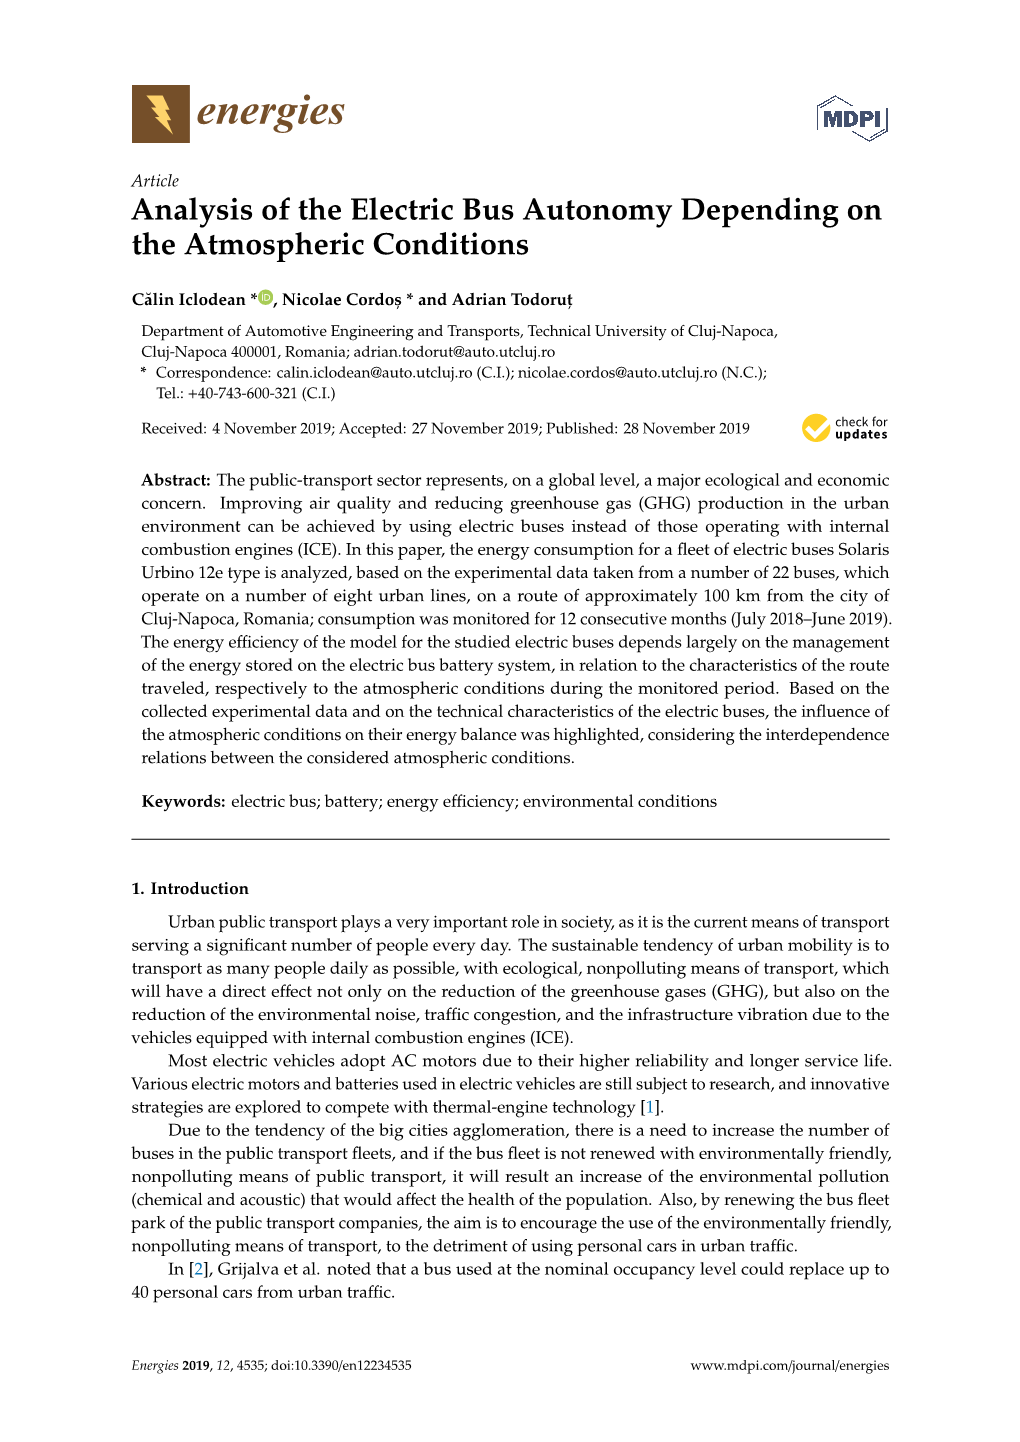 Analysis of the Electric Bus Autonomy Depending on the Atmospheric Conditions